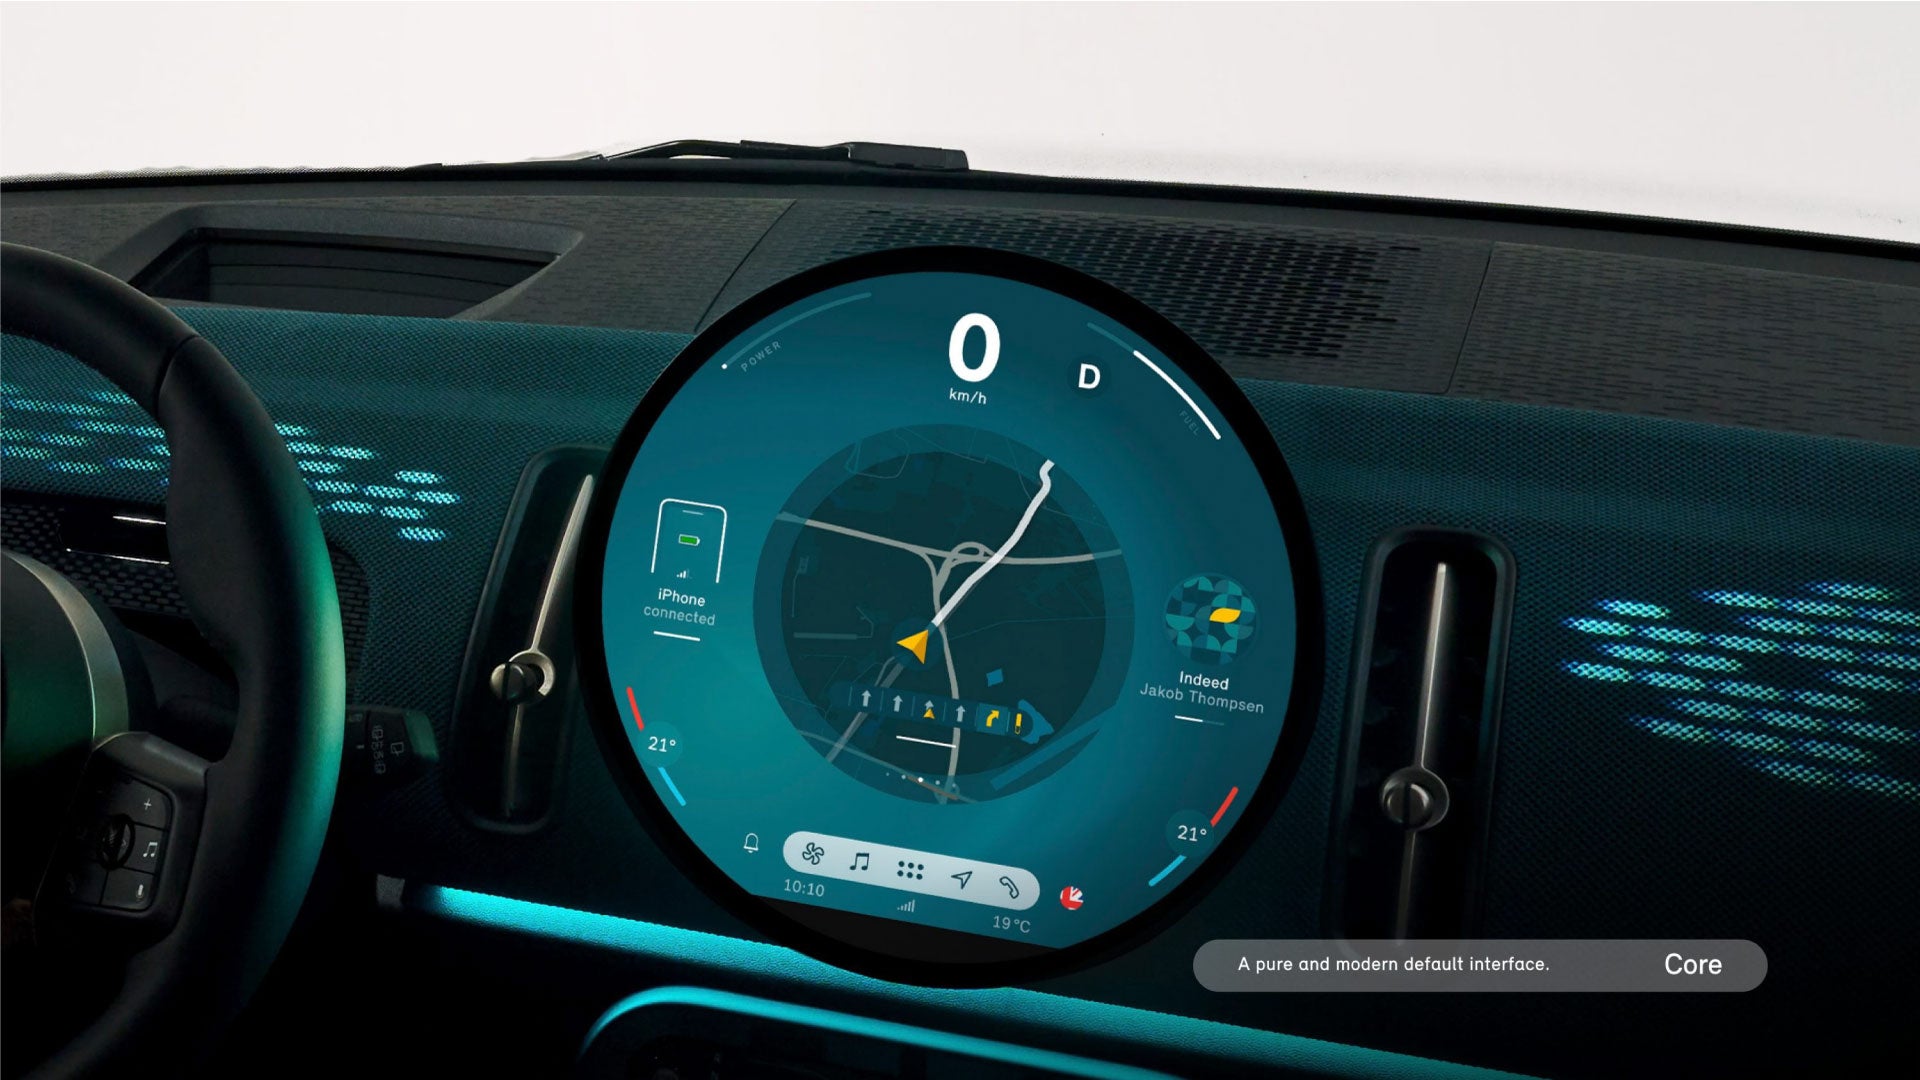 Closeup view of the MINI Countryman S ALL4 9.4” round center information OLED display interface.